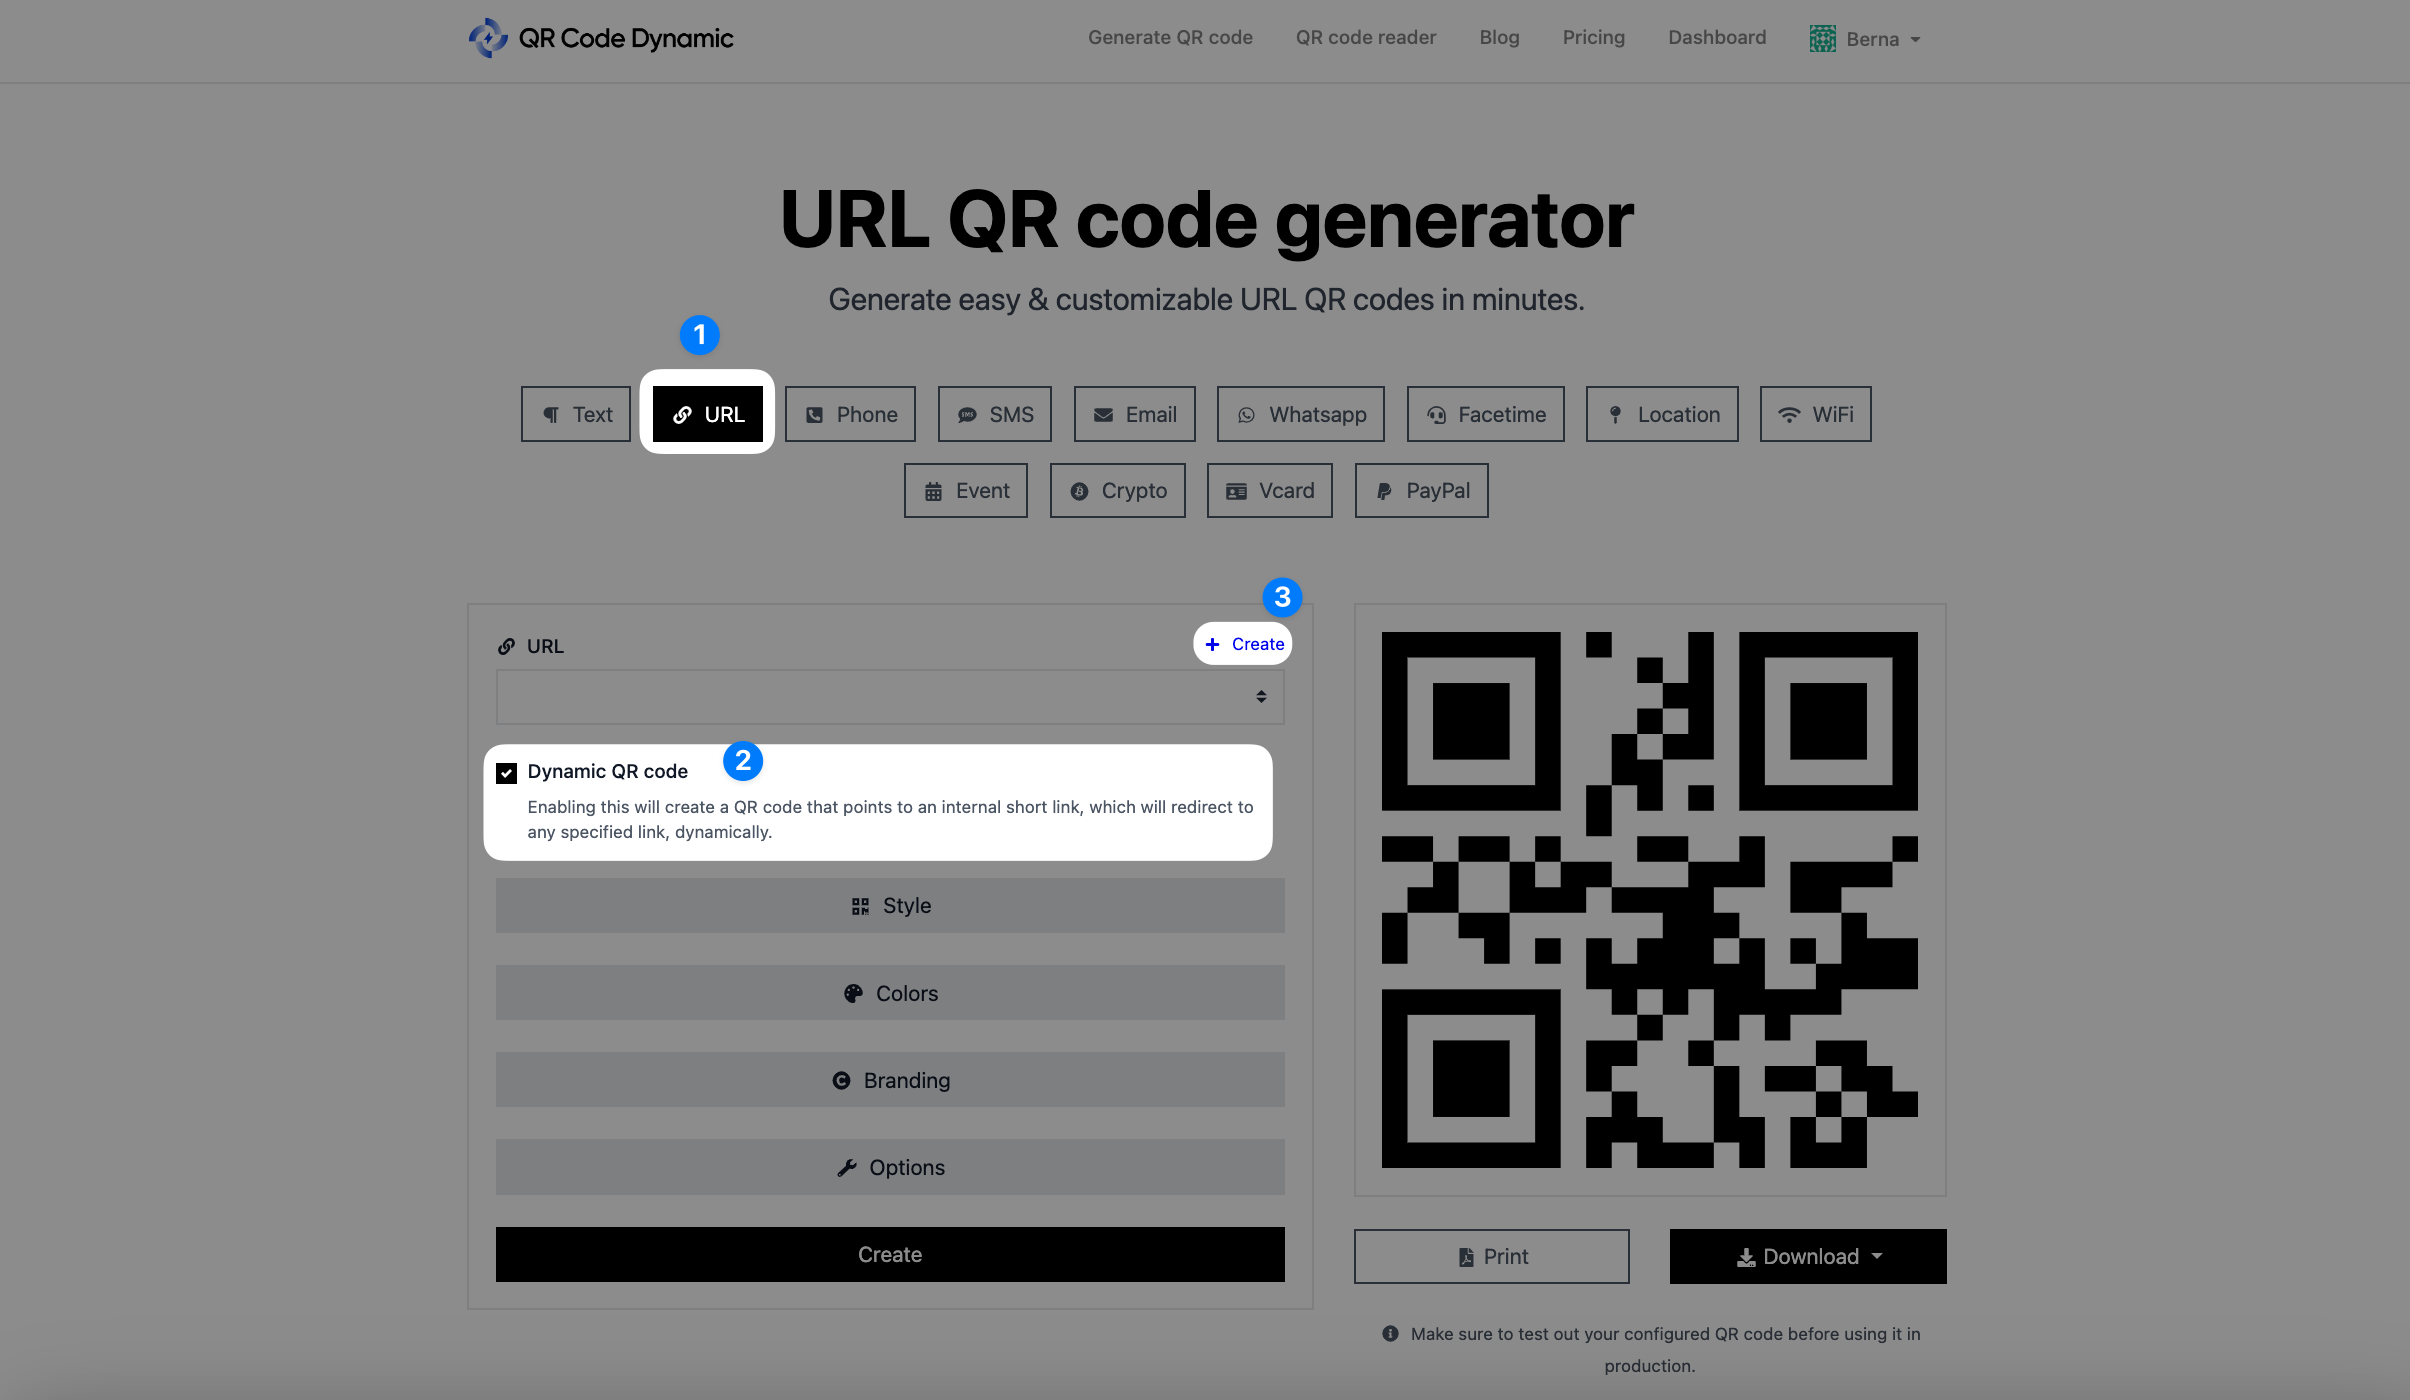 creating URL QR code and making it dynamic on QRCodeDynamic